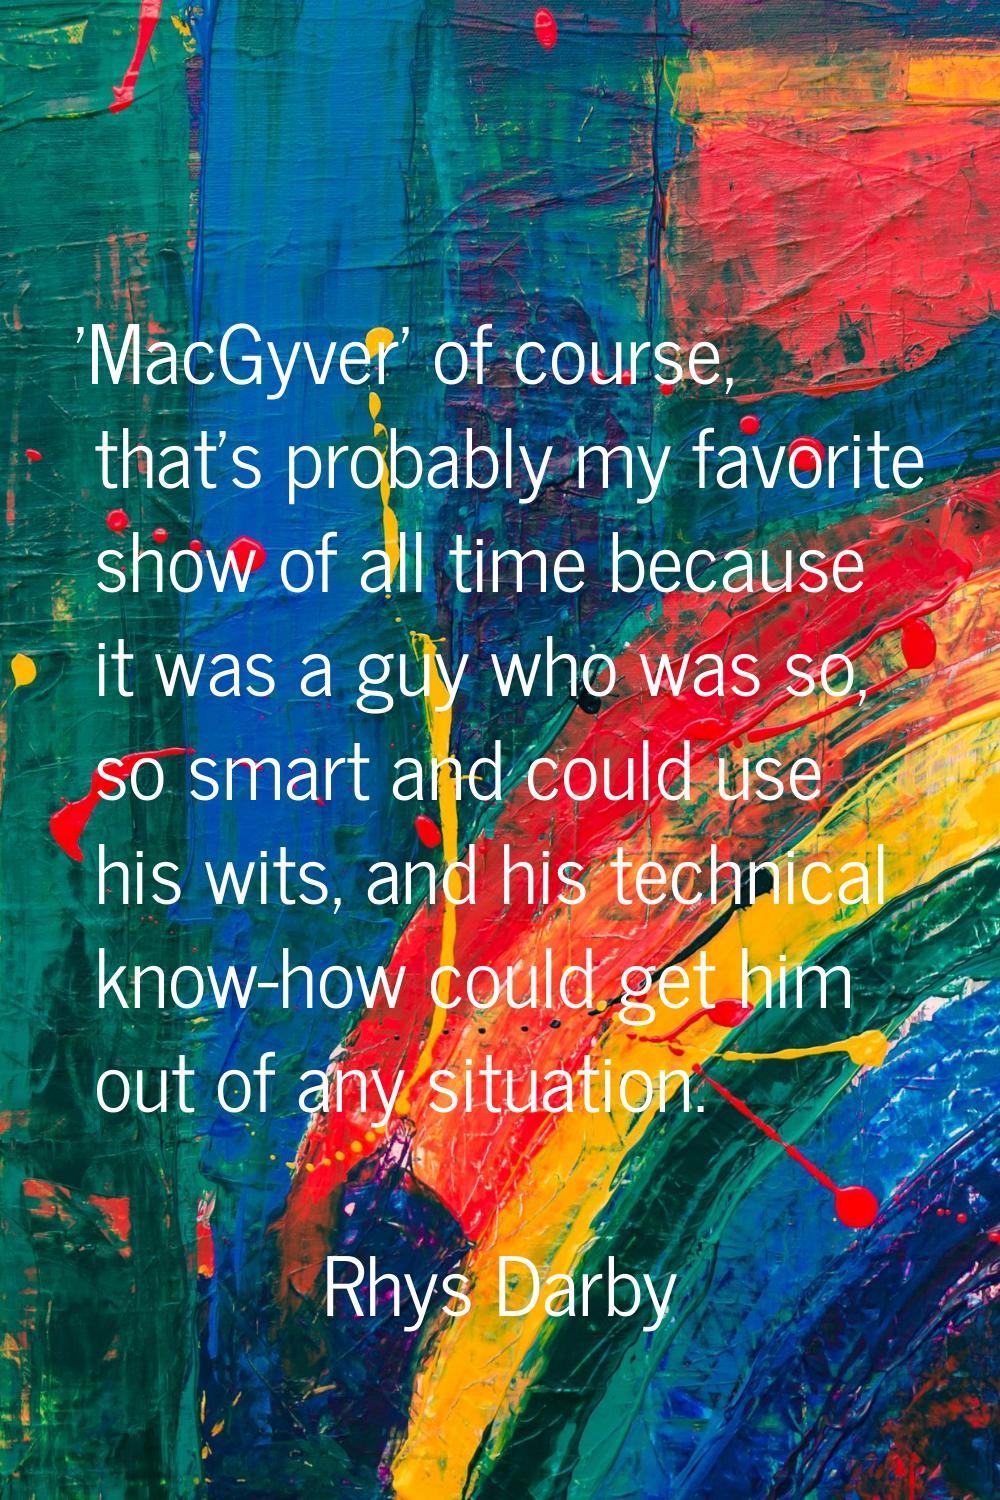 'MacGyver' of course, that's probably my favorite show of all time because it was a guy who was so,